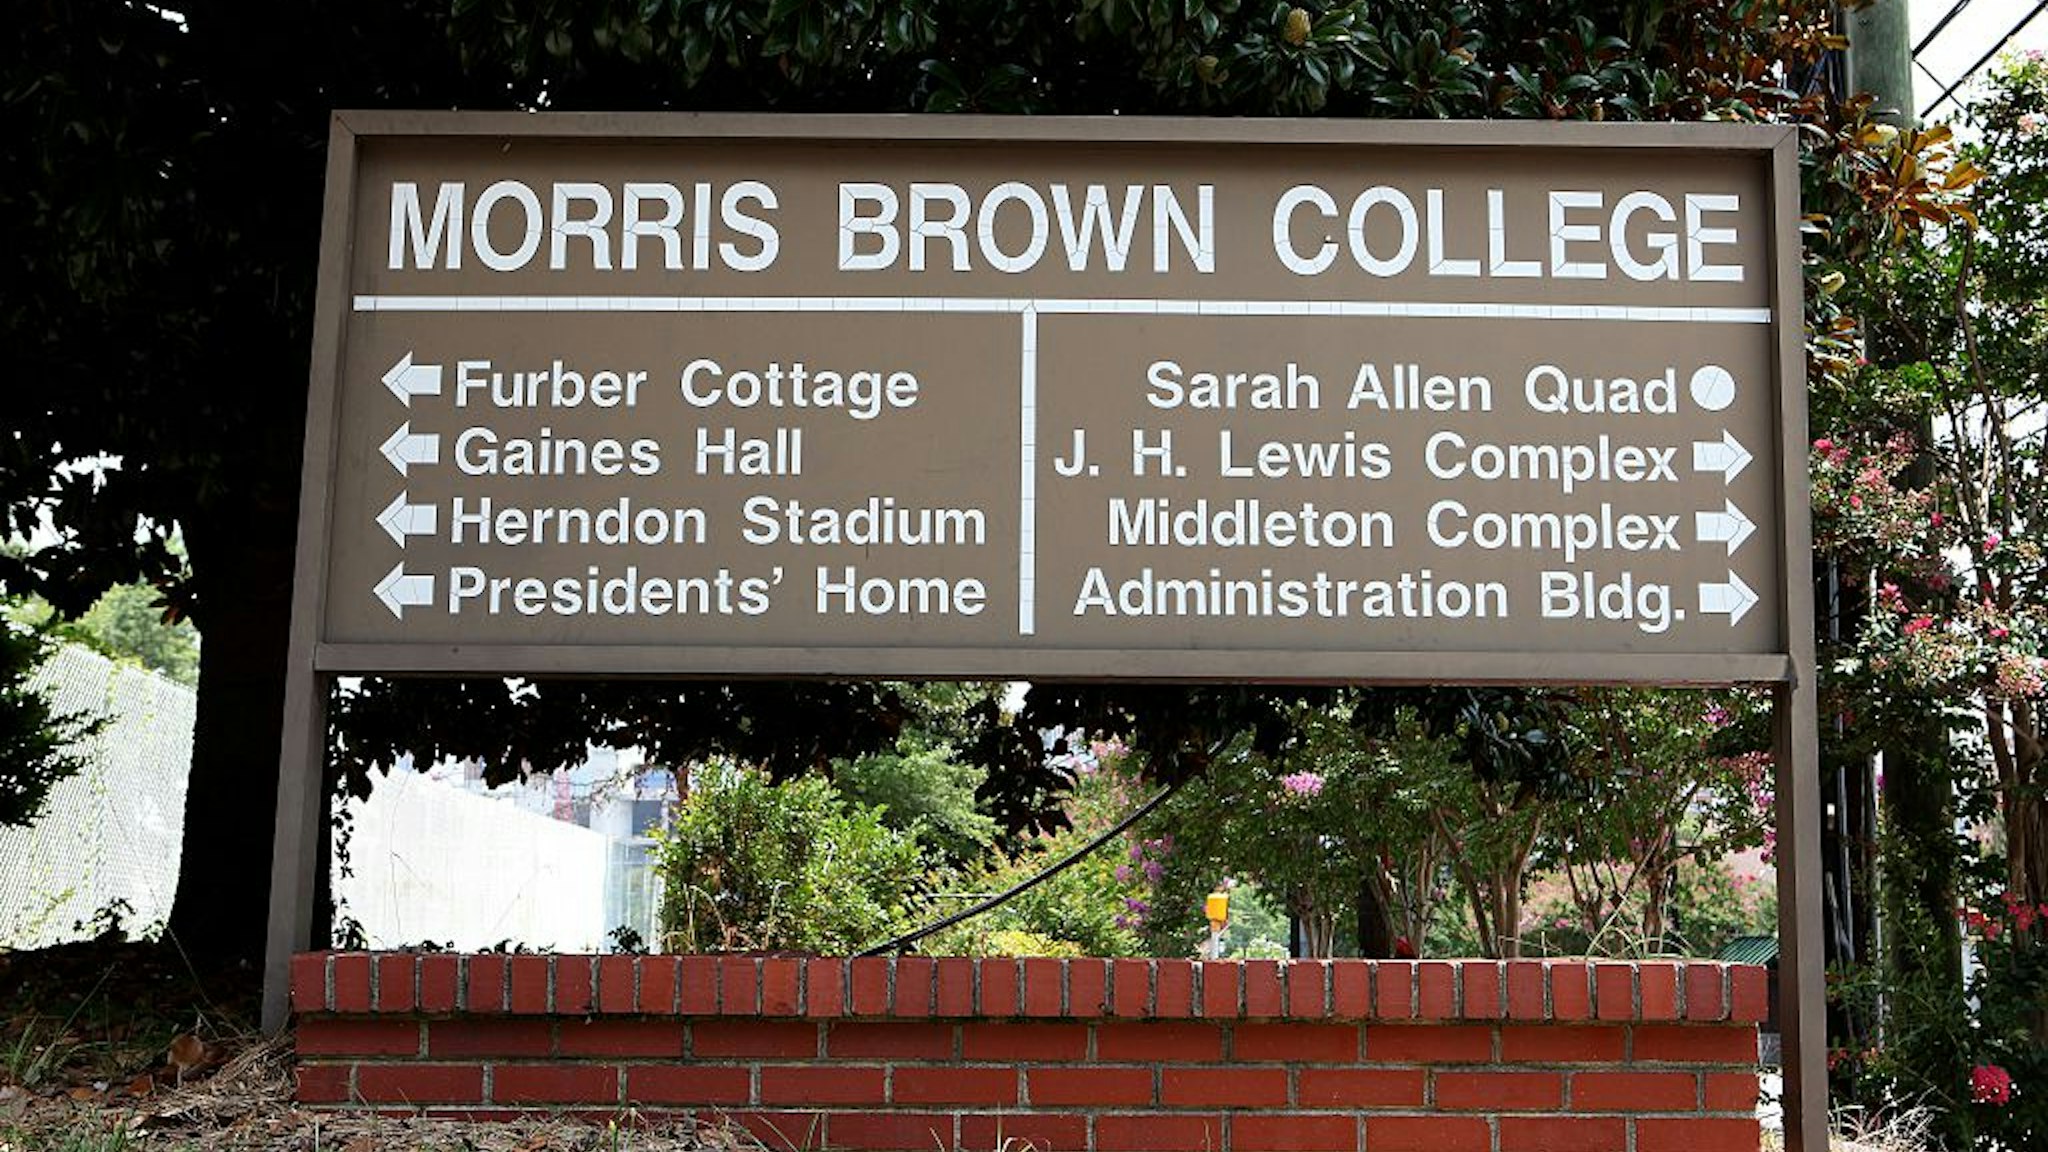 ATLANTA - JULY 18: Morris Brown College (founded in 1881) signage on July 18, 2015 in Atlanta, Georgia. (Photo By Raymond Boyd/Getty Images)